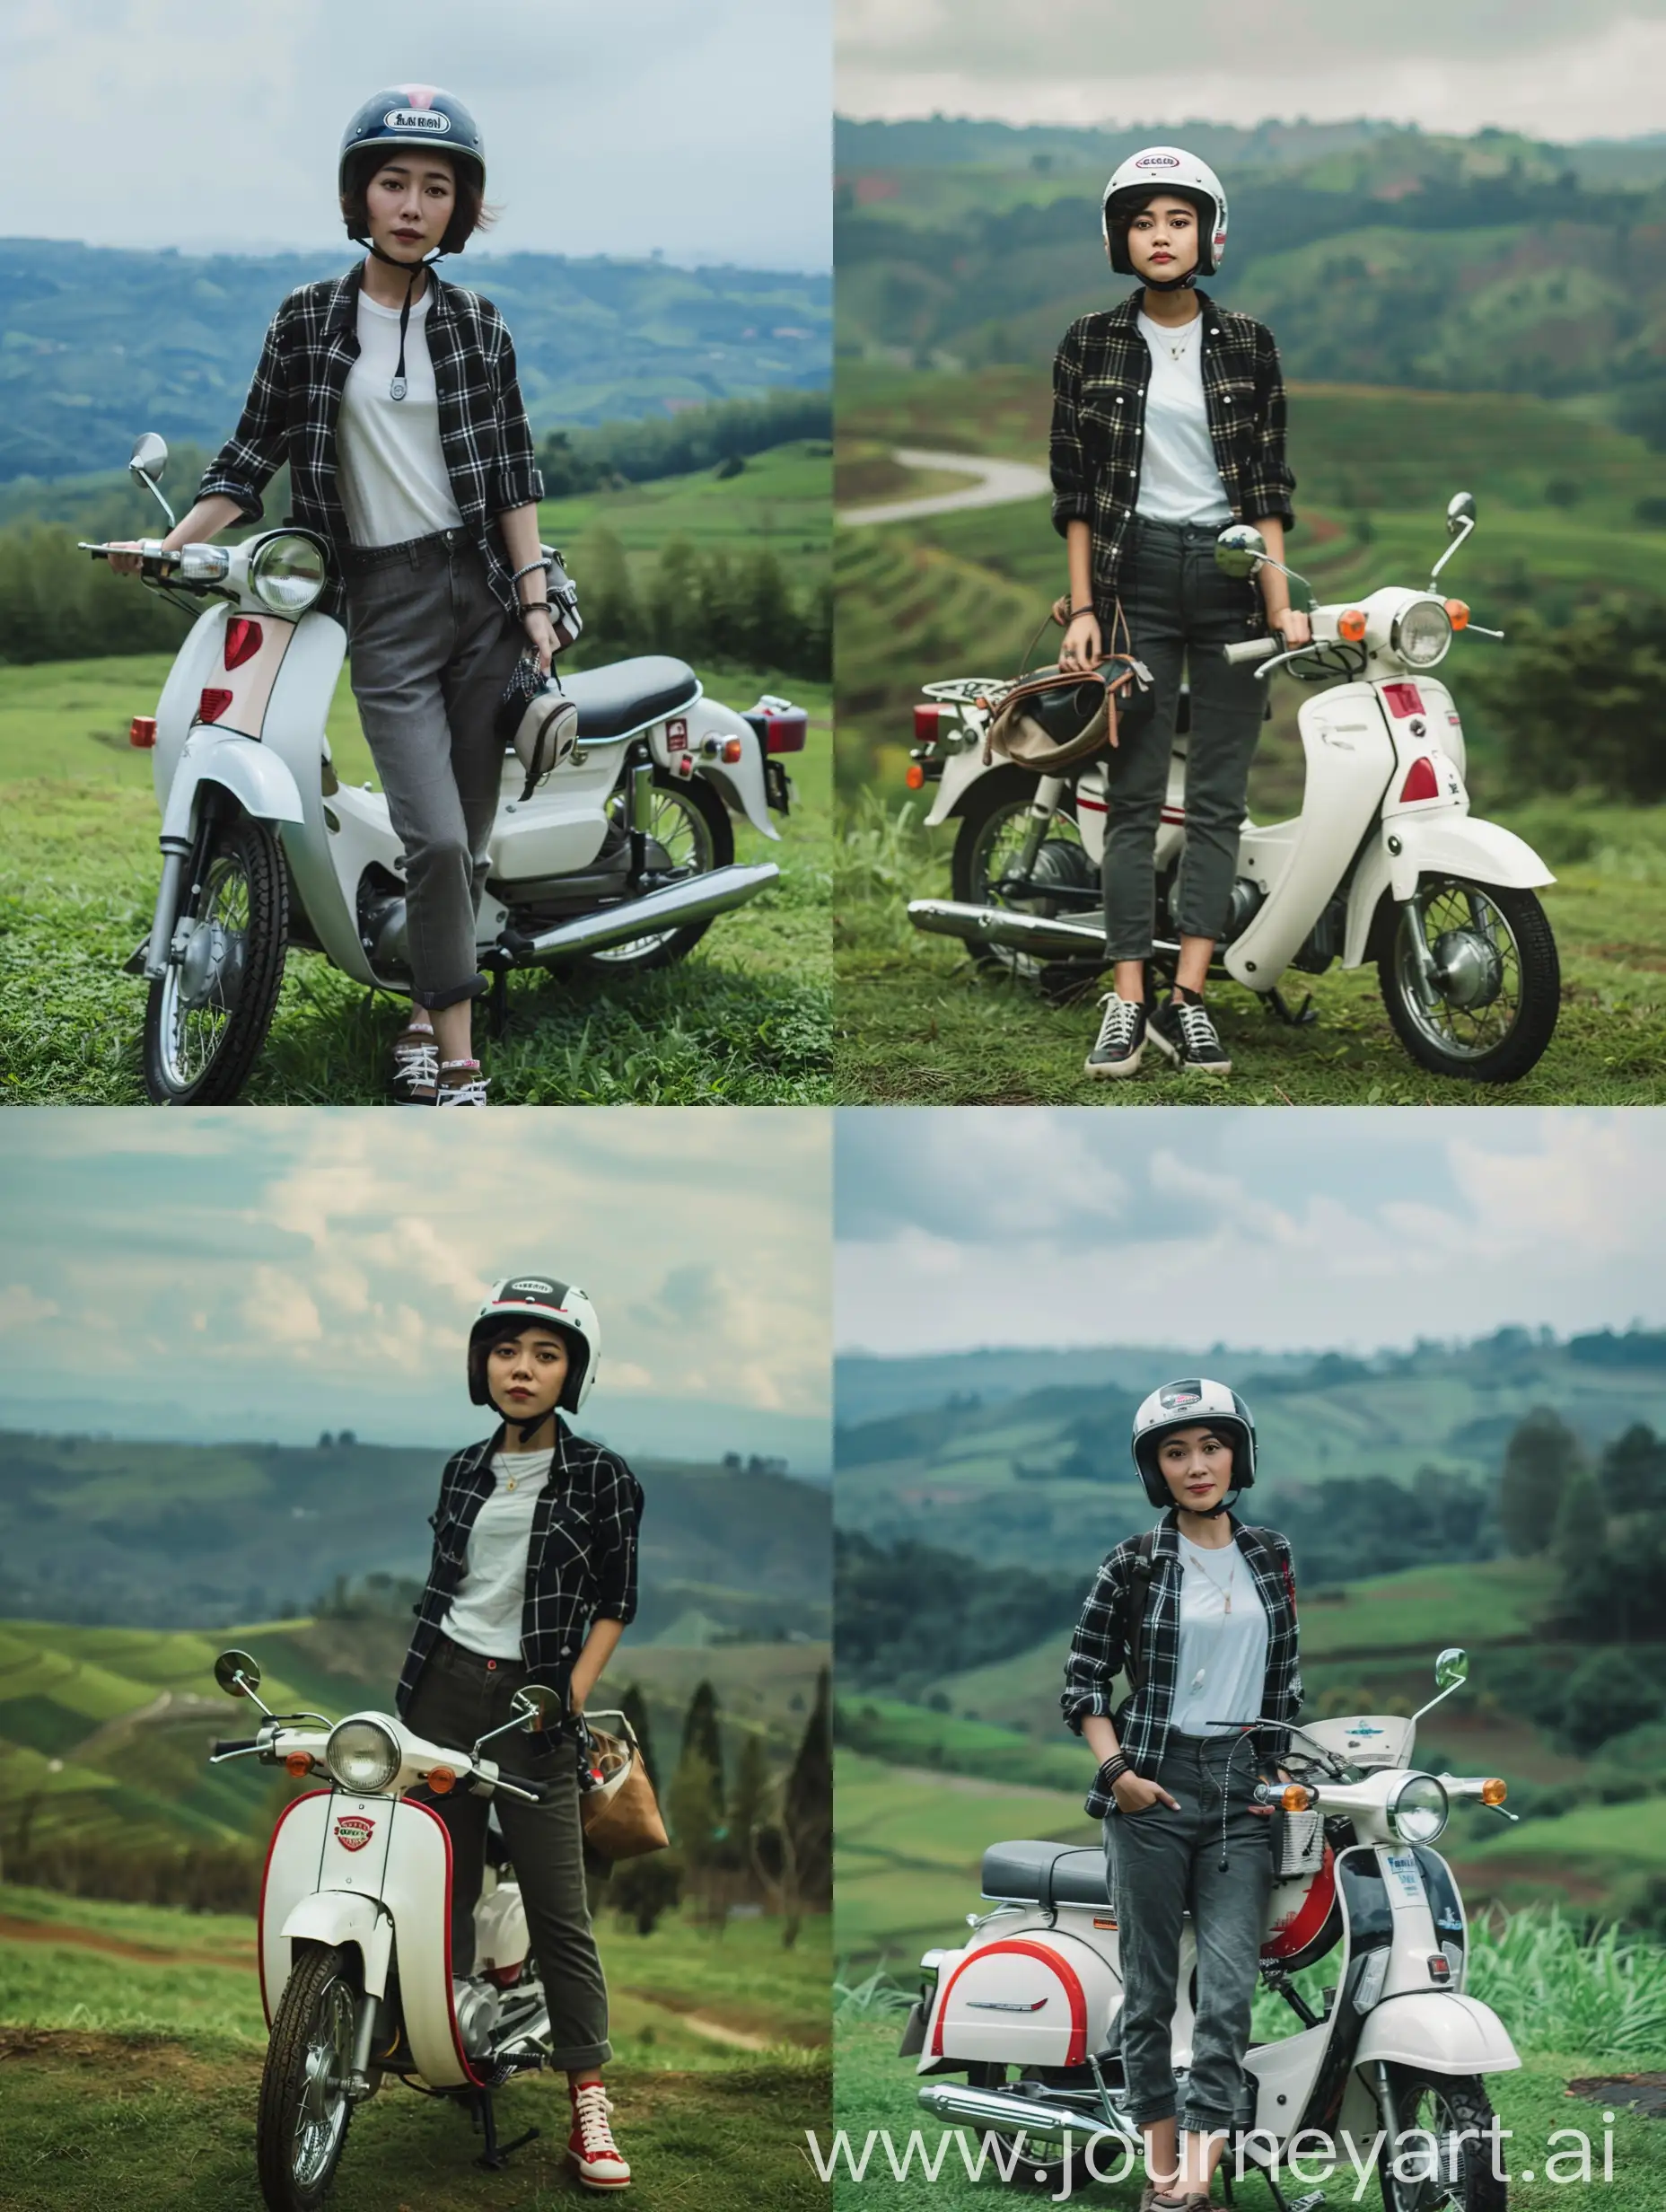 Attractive-Indonesian-Woman-with-Retro-Motorcycle-in-Serene-Landscape